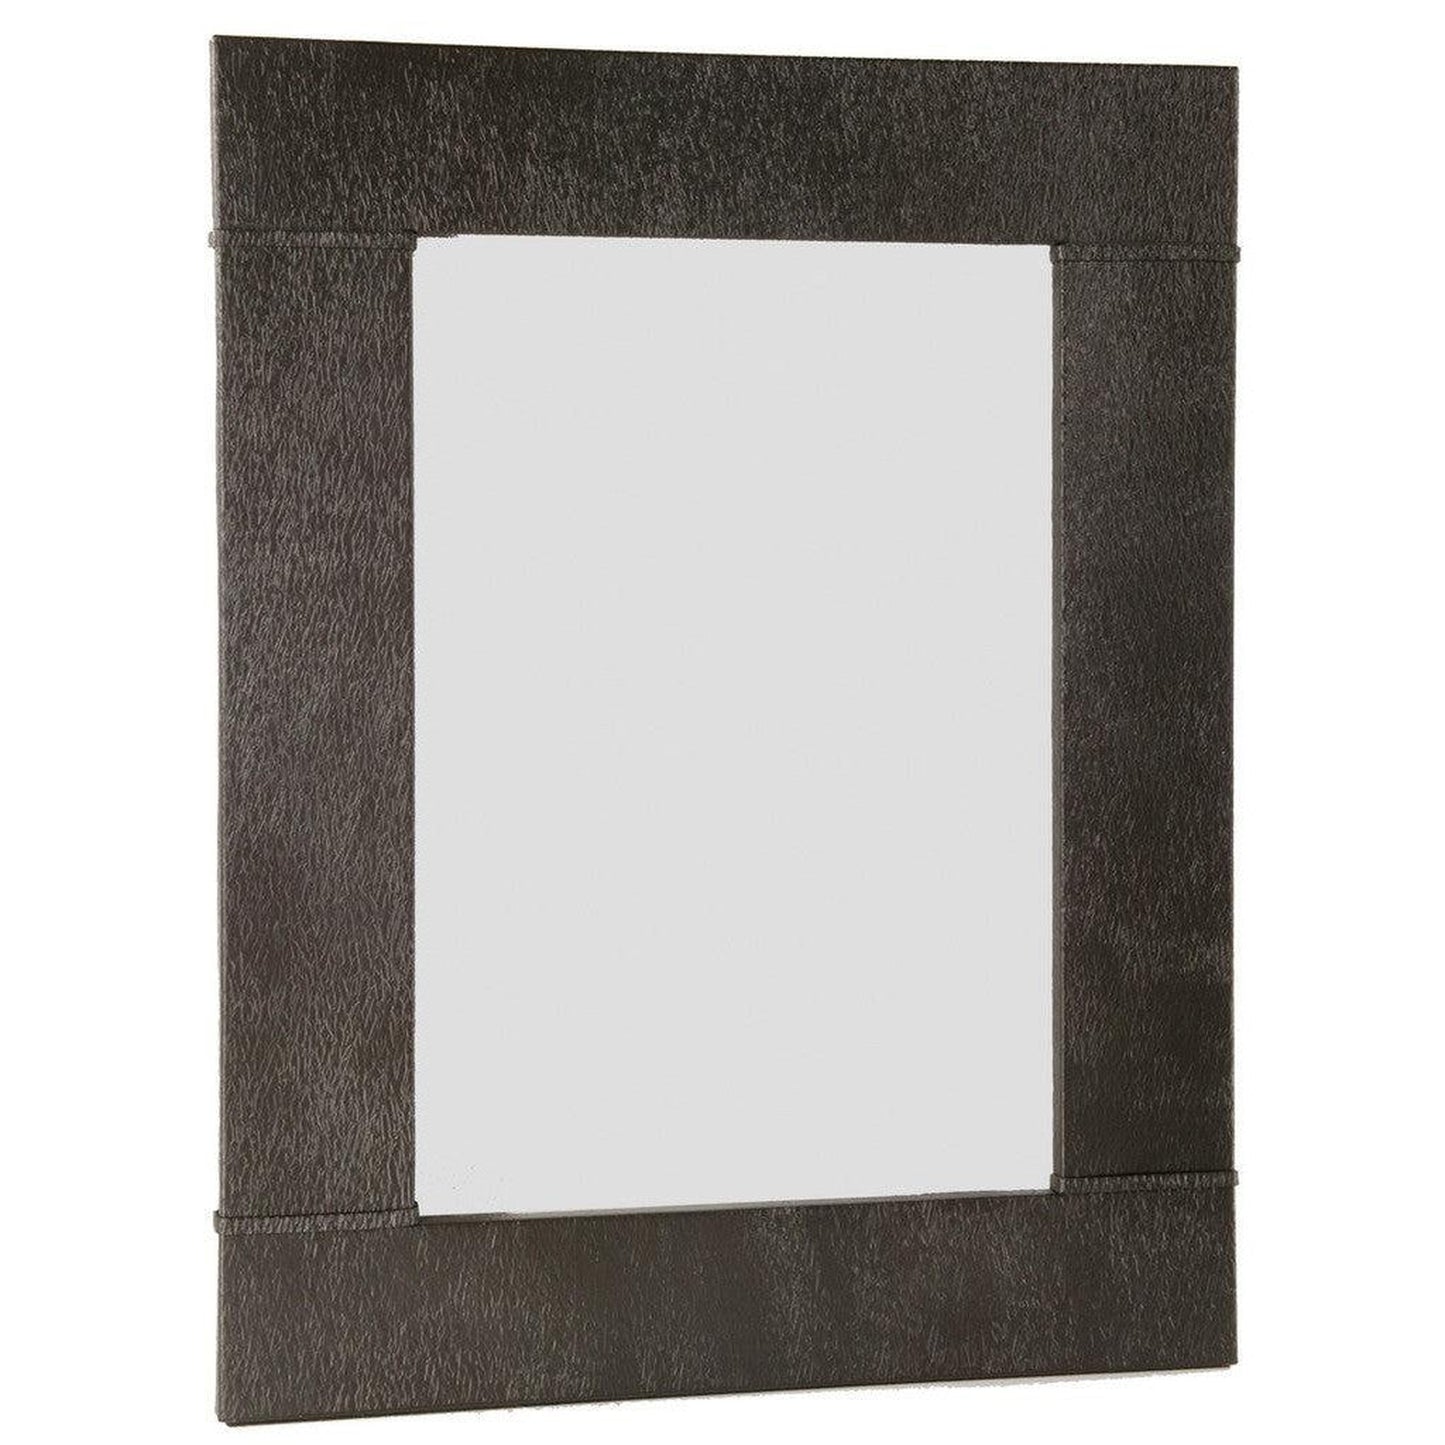 Stone County Ironworks Cedarvale 31" x 35" Small Hand Rubbed Pewter Iron Wall Mirror With Pewter Iron Accent